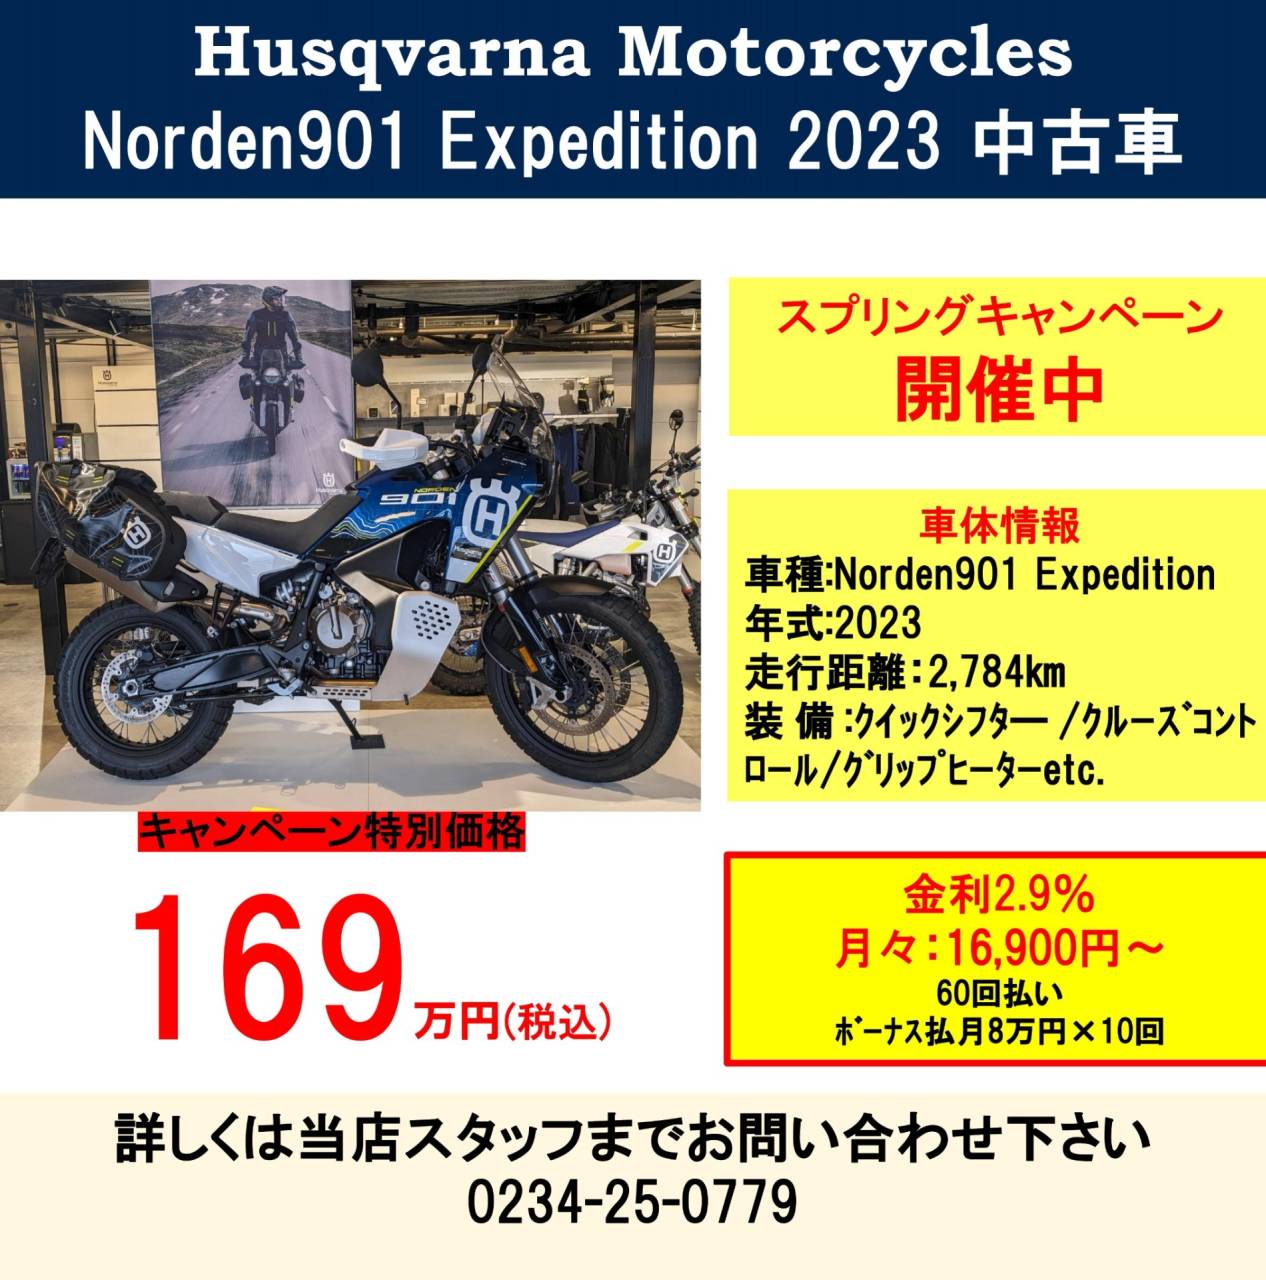 Norden901 Expedition 認定中古車 ハスクバーナ山形 | 二輪に関する 